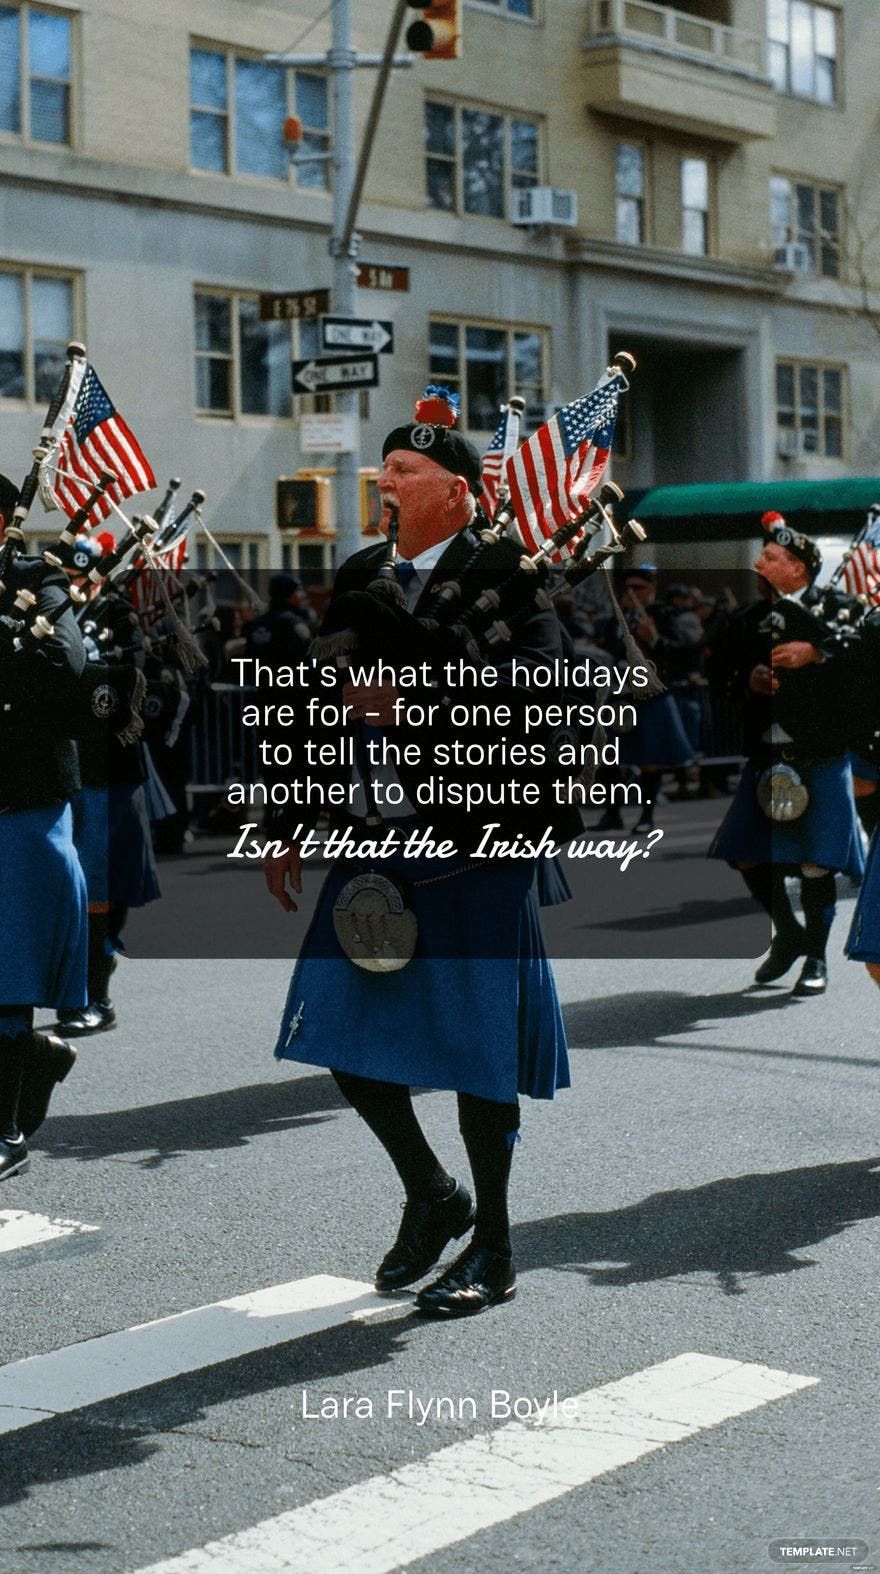 Lara Flynn Boyle - That's what the holidays are for - for one person to tell the stories and another to dispute them. Isn't that the Irish way?